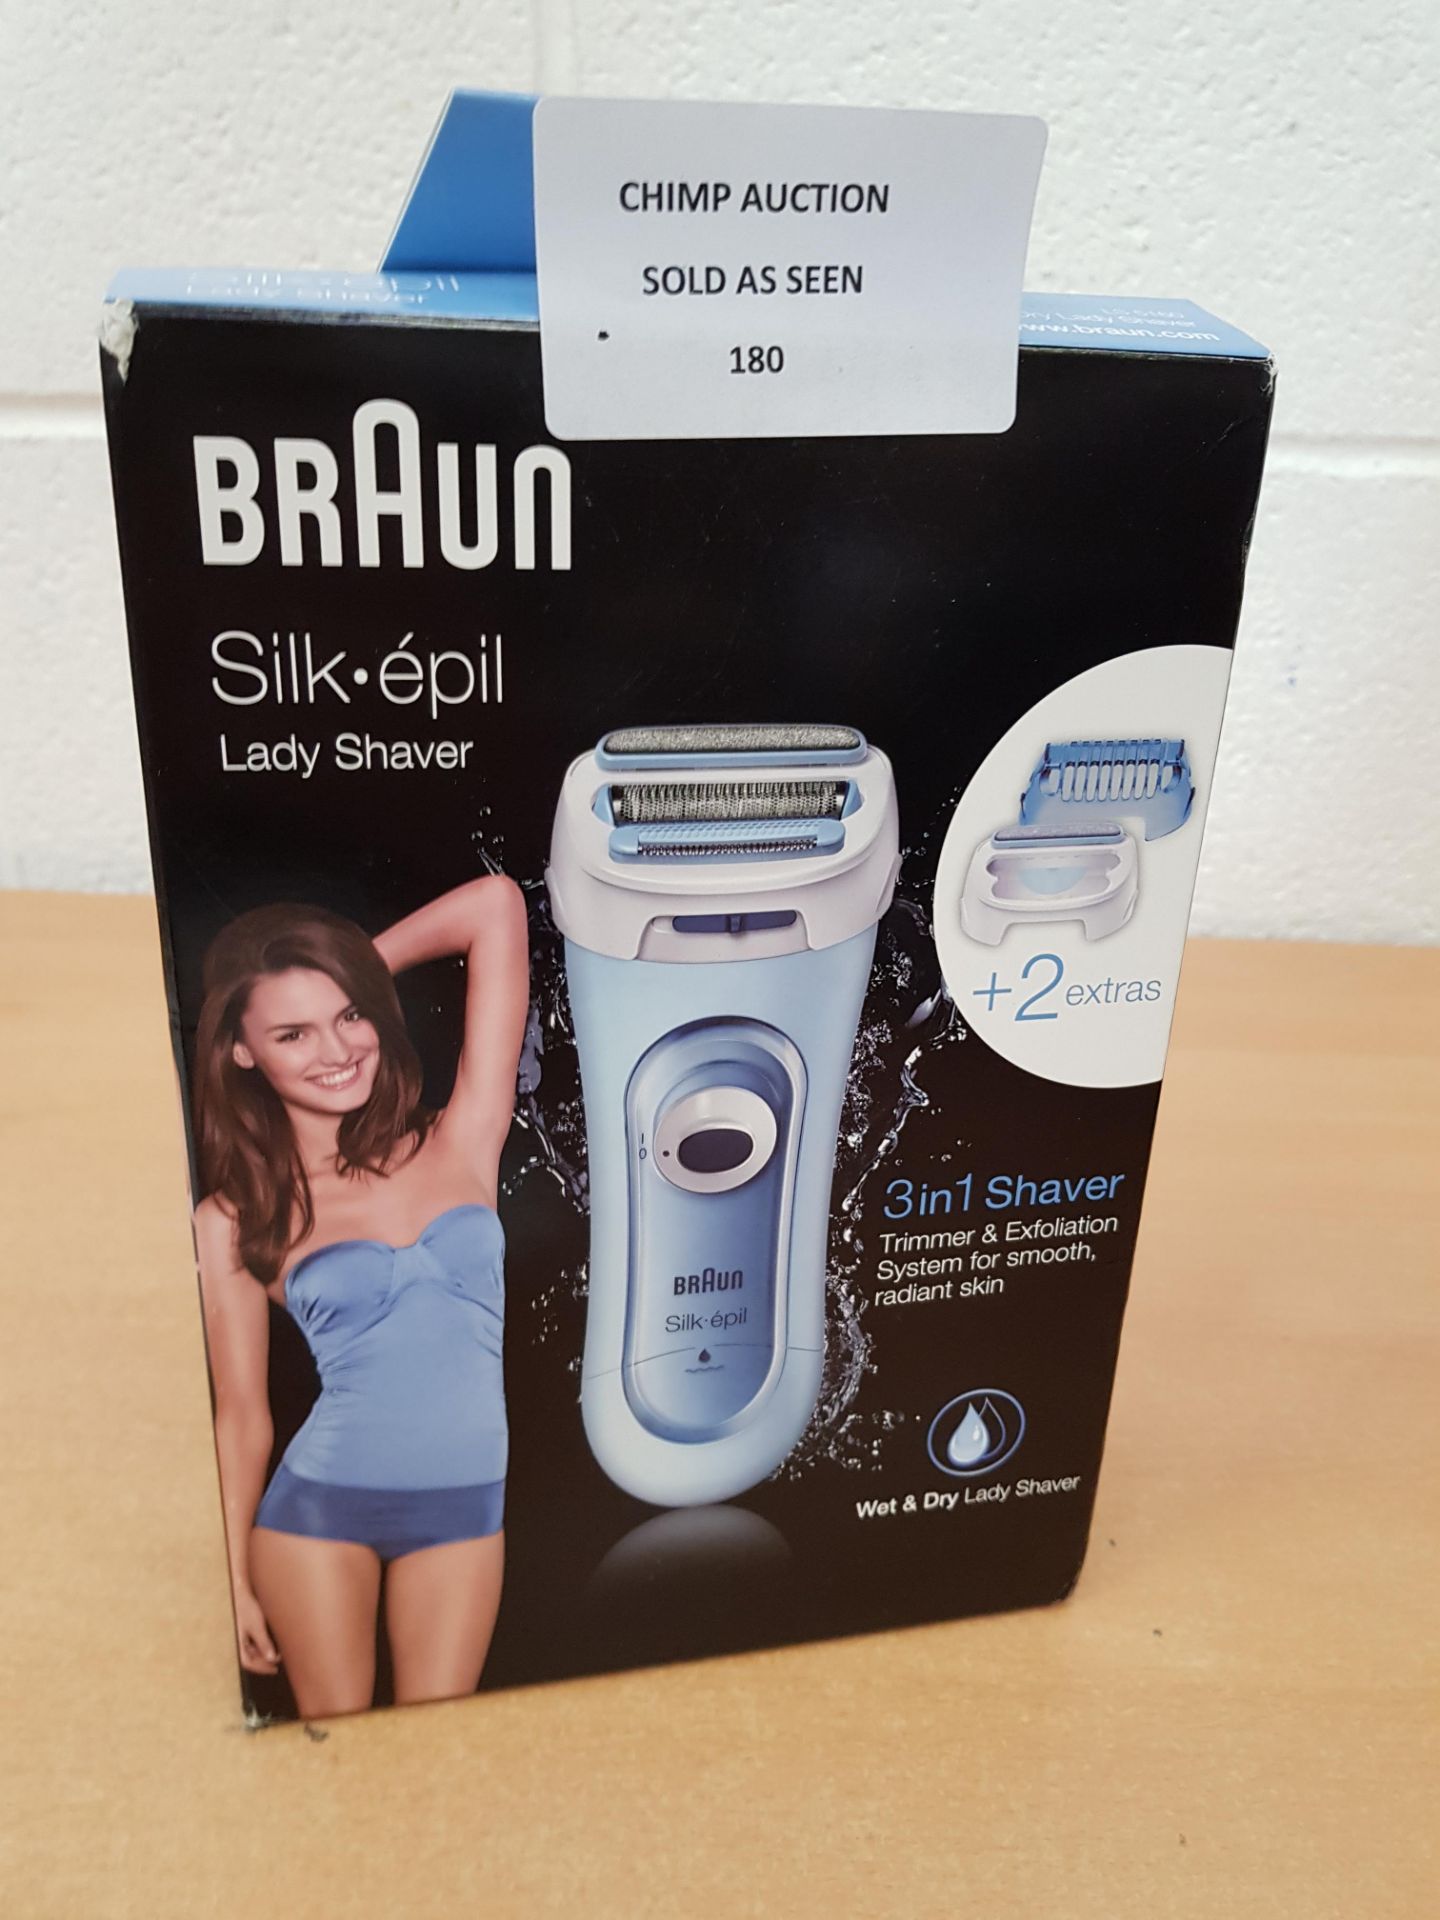 Braun Silk-épil Lady Shaver 5-160, 3-in-1 Wet and Dry Electric Shaver